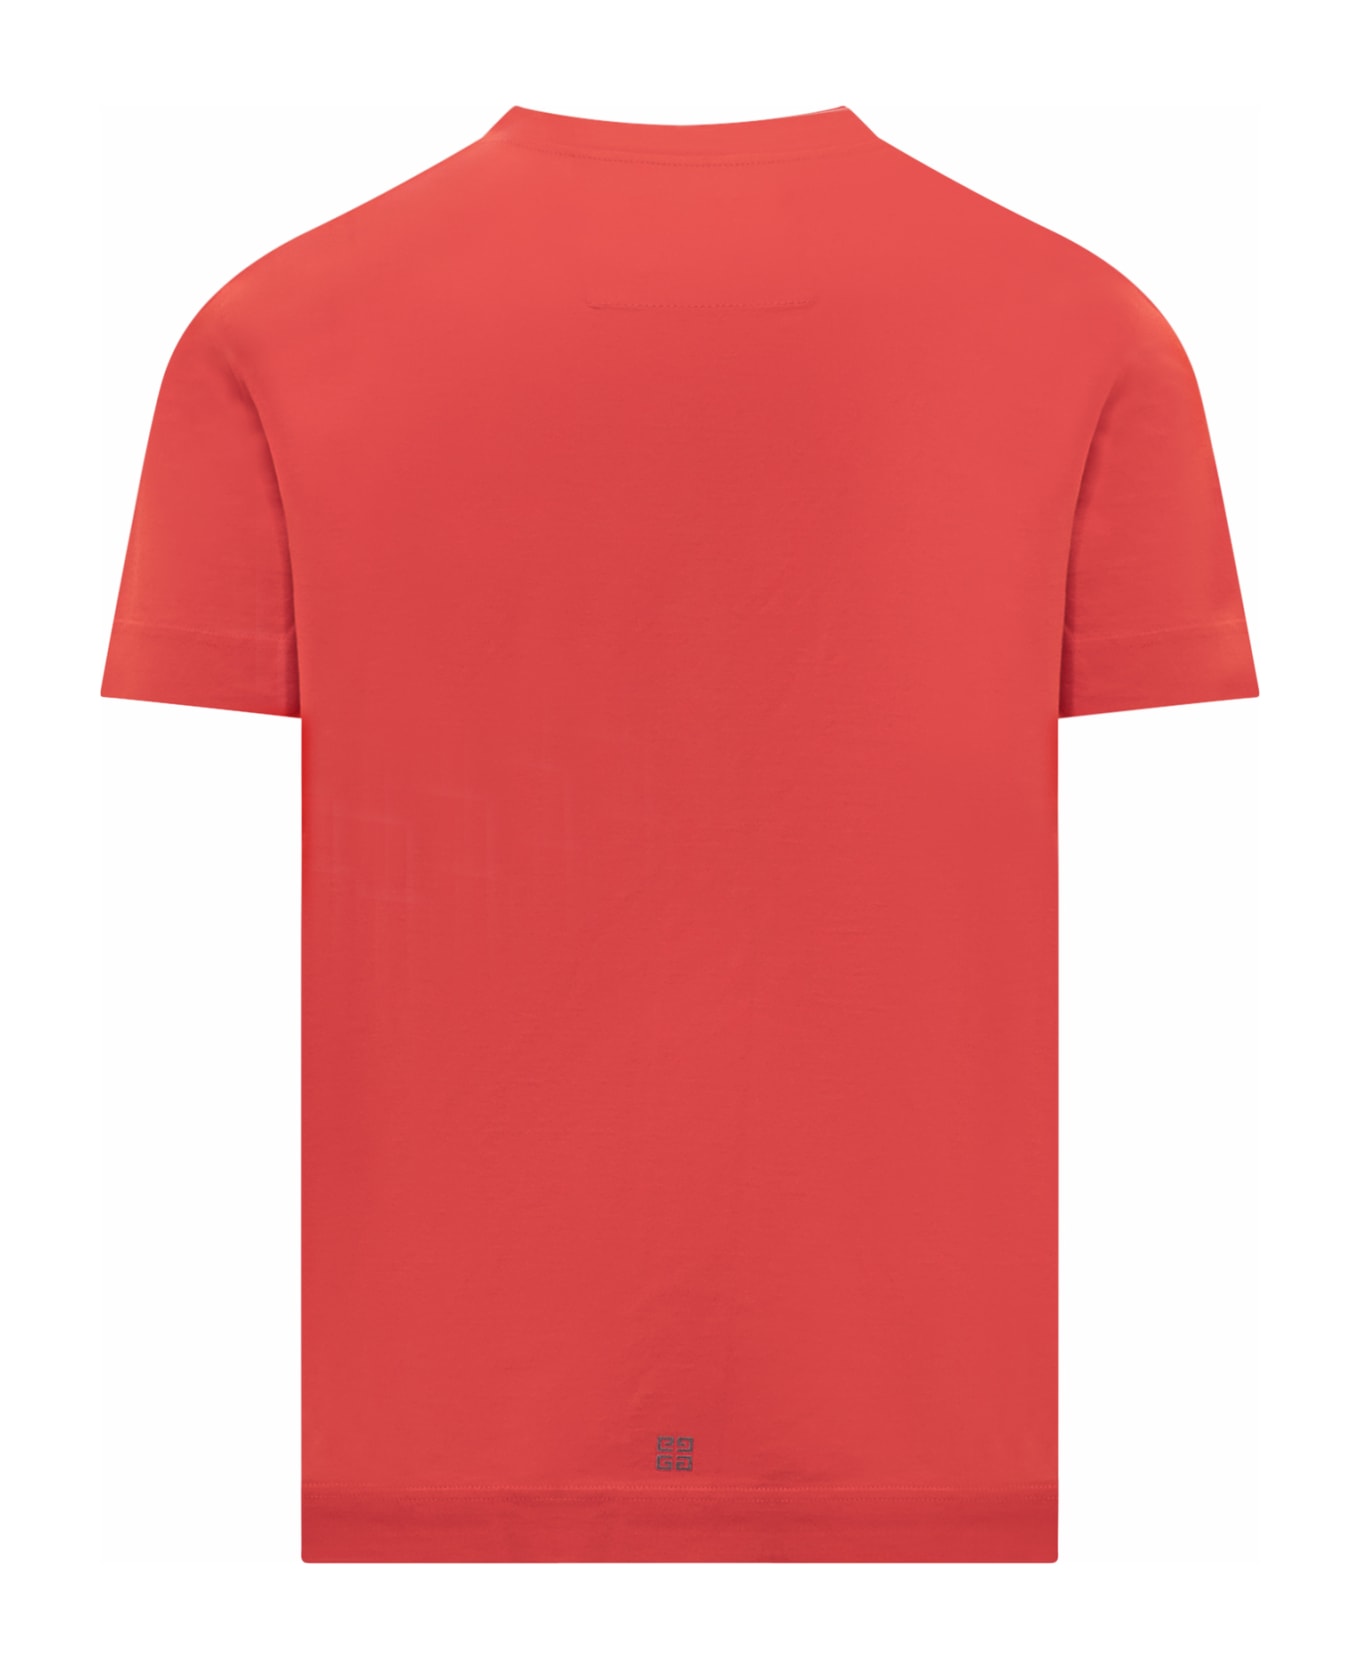 Givenchy T-shirt - Red シャツ